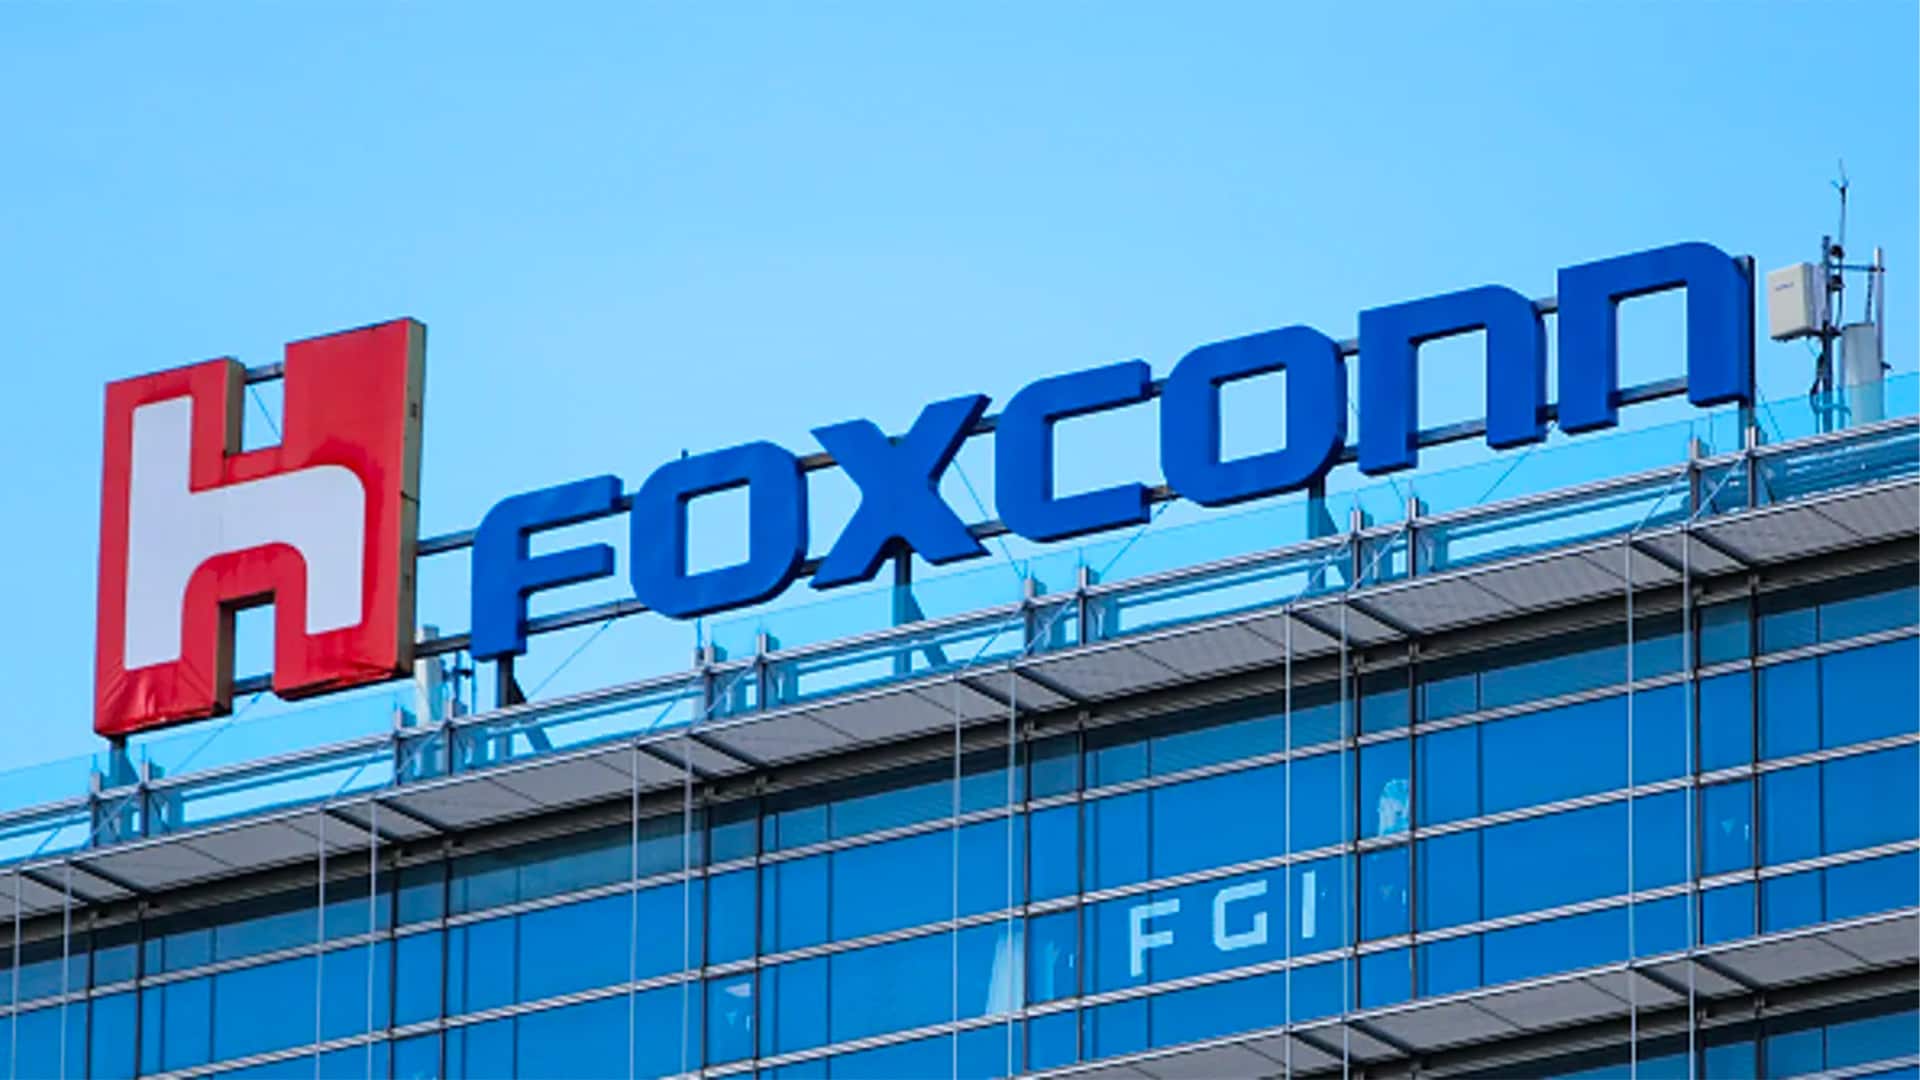 Foxconn’s main manufacturing division to invest $1.57 billion in building a factory in India